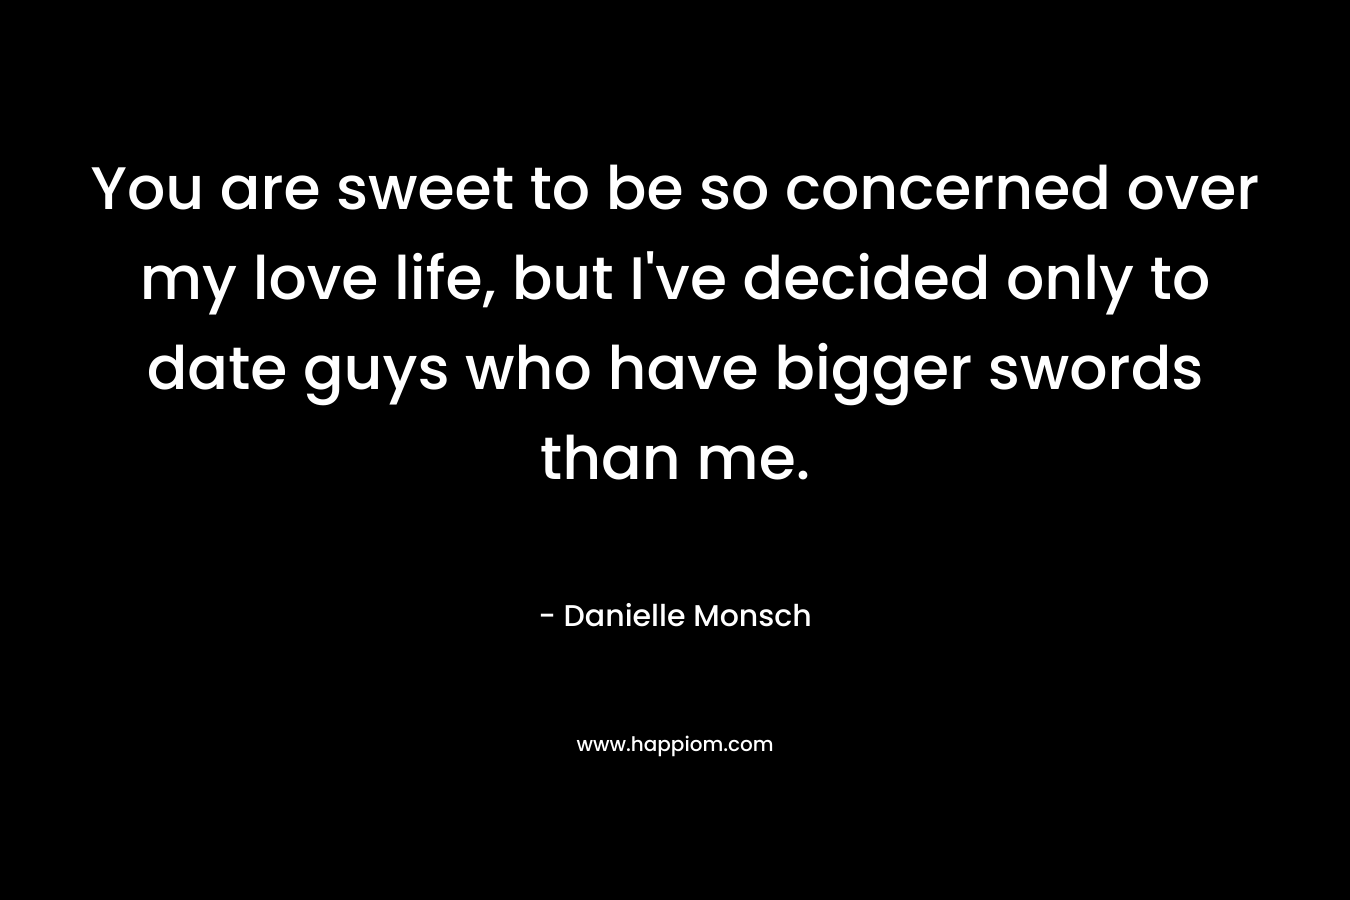 You are sweet to be so concerned over my love life, but I’ve decided only to date guys who have bigger swords than me. – Danielle Monsch